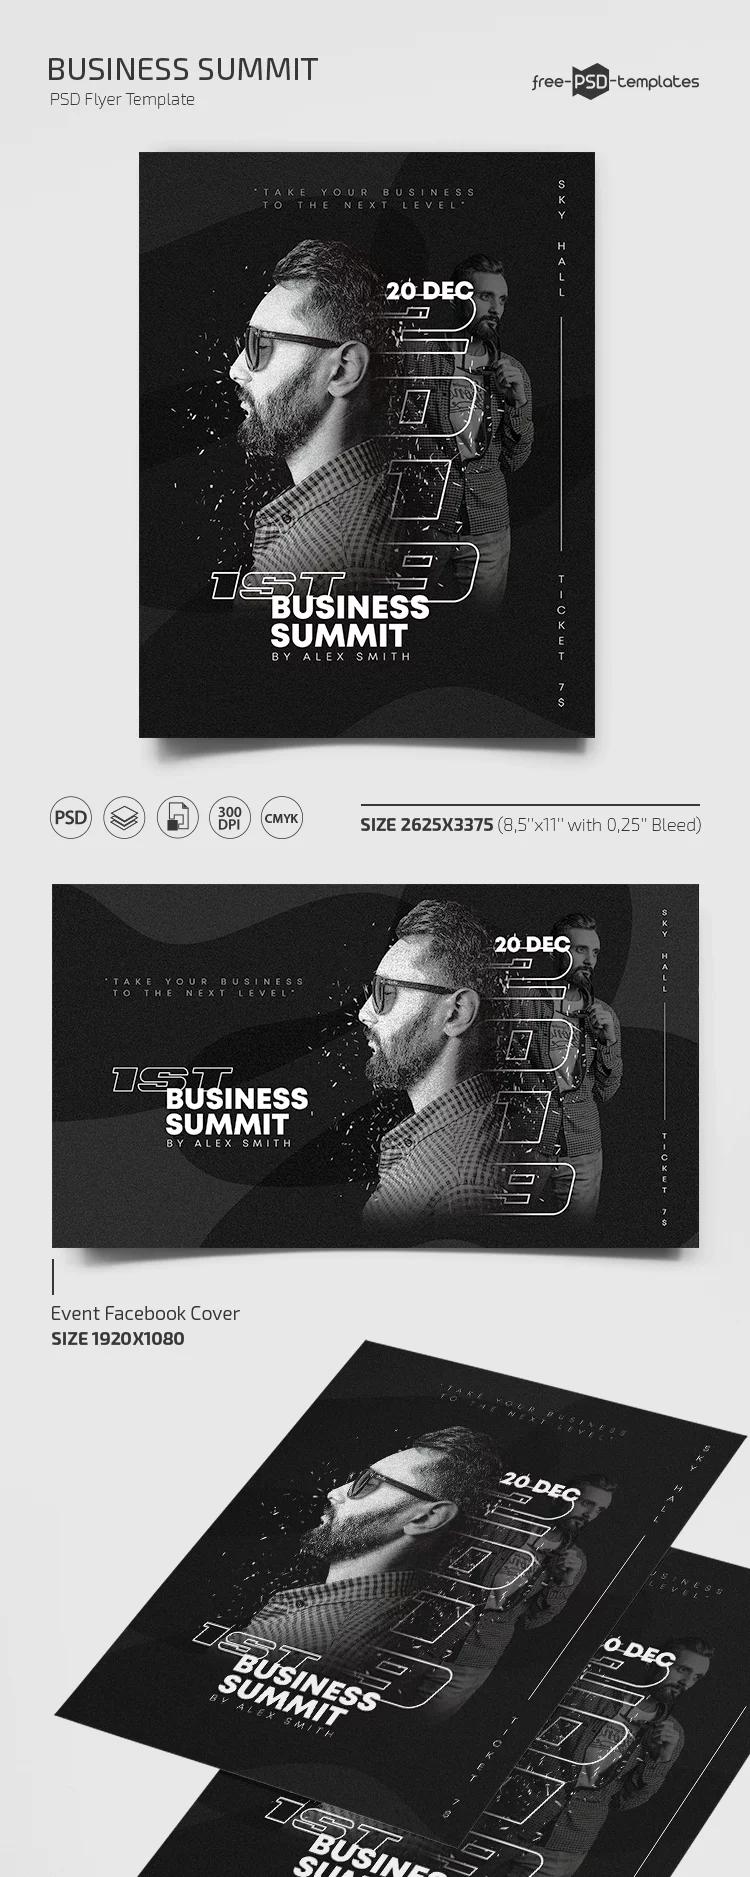 Free Business Summit Flyer Template in PSD